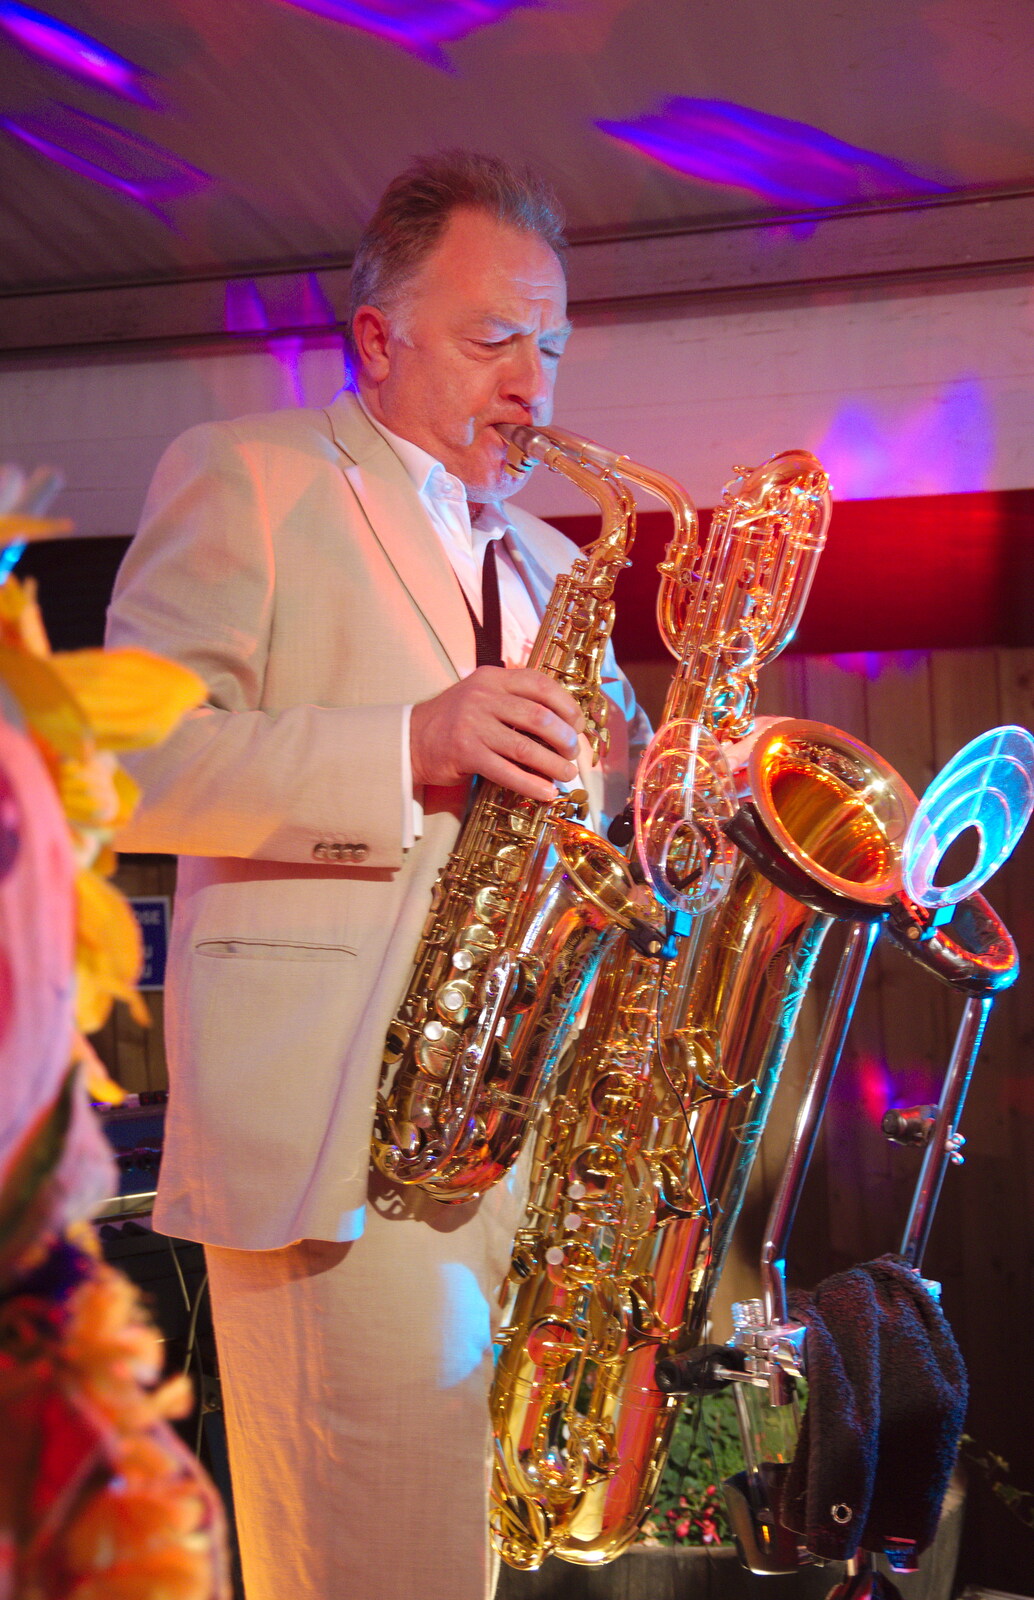 The sax dude plays two horns at once from The Shakesbeer Festival, Star Wing Brewery, Redgrave, Suffolk - 13th July 2019